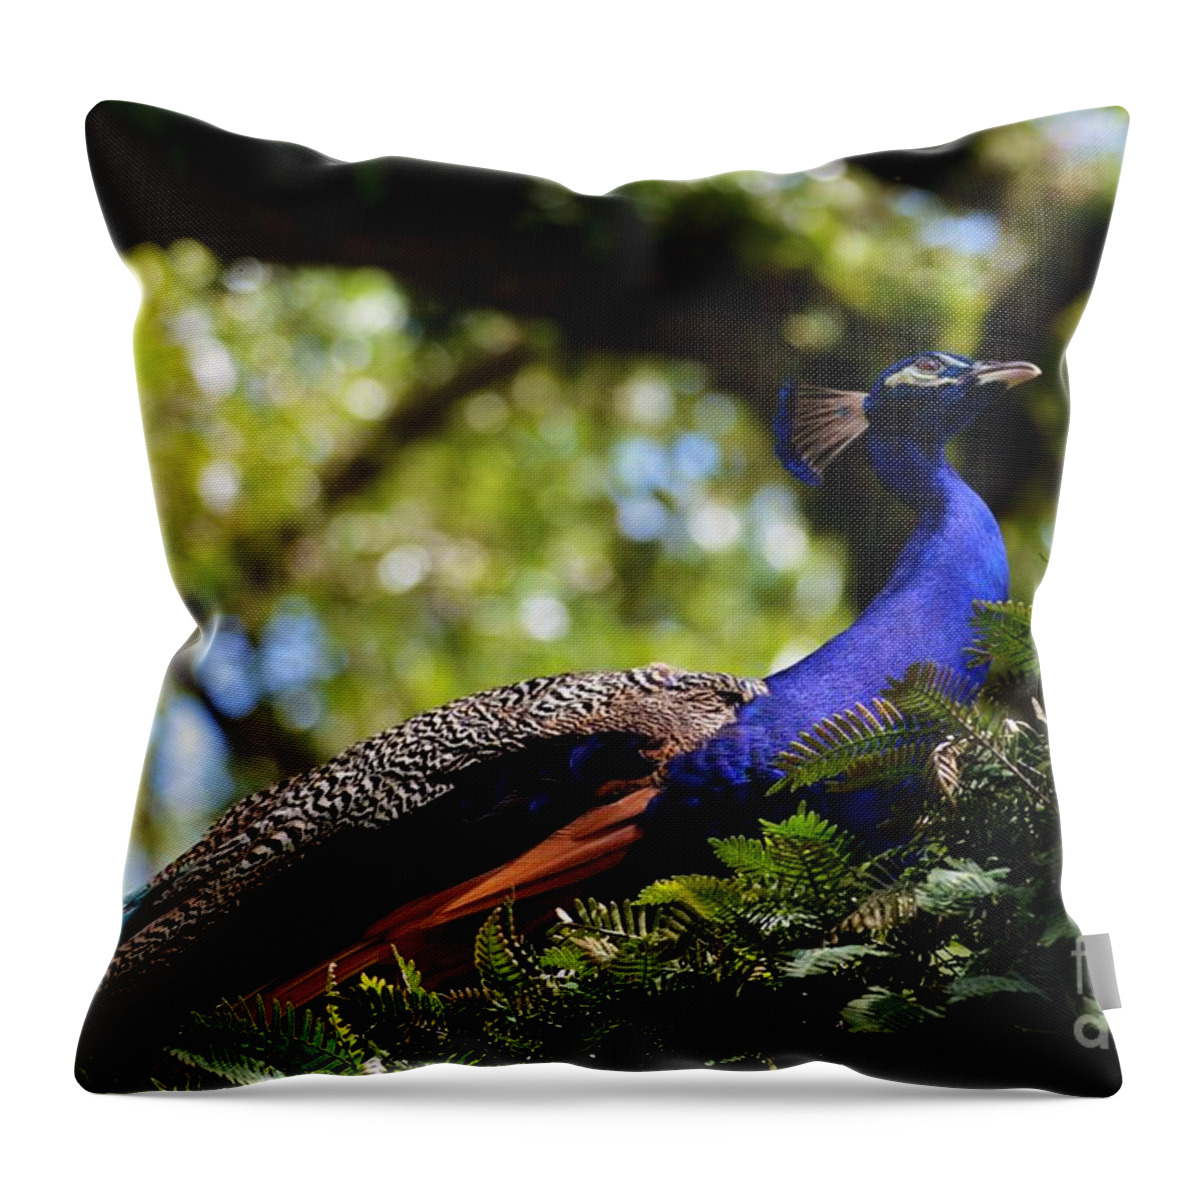 Peacock Throw Pillow featuring the photograph Look Up by Julie Adair